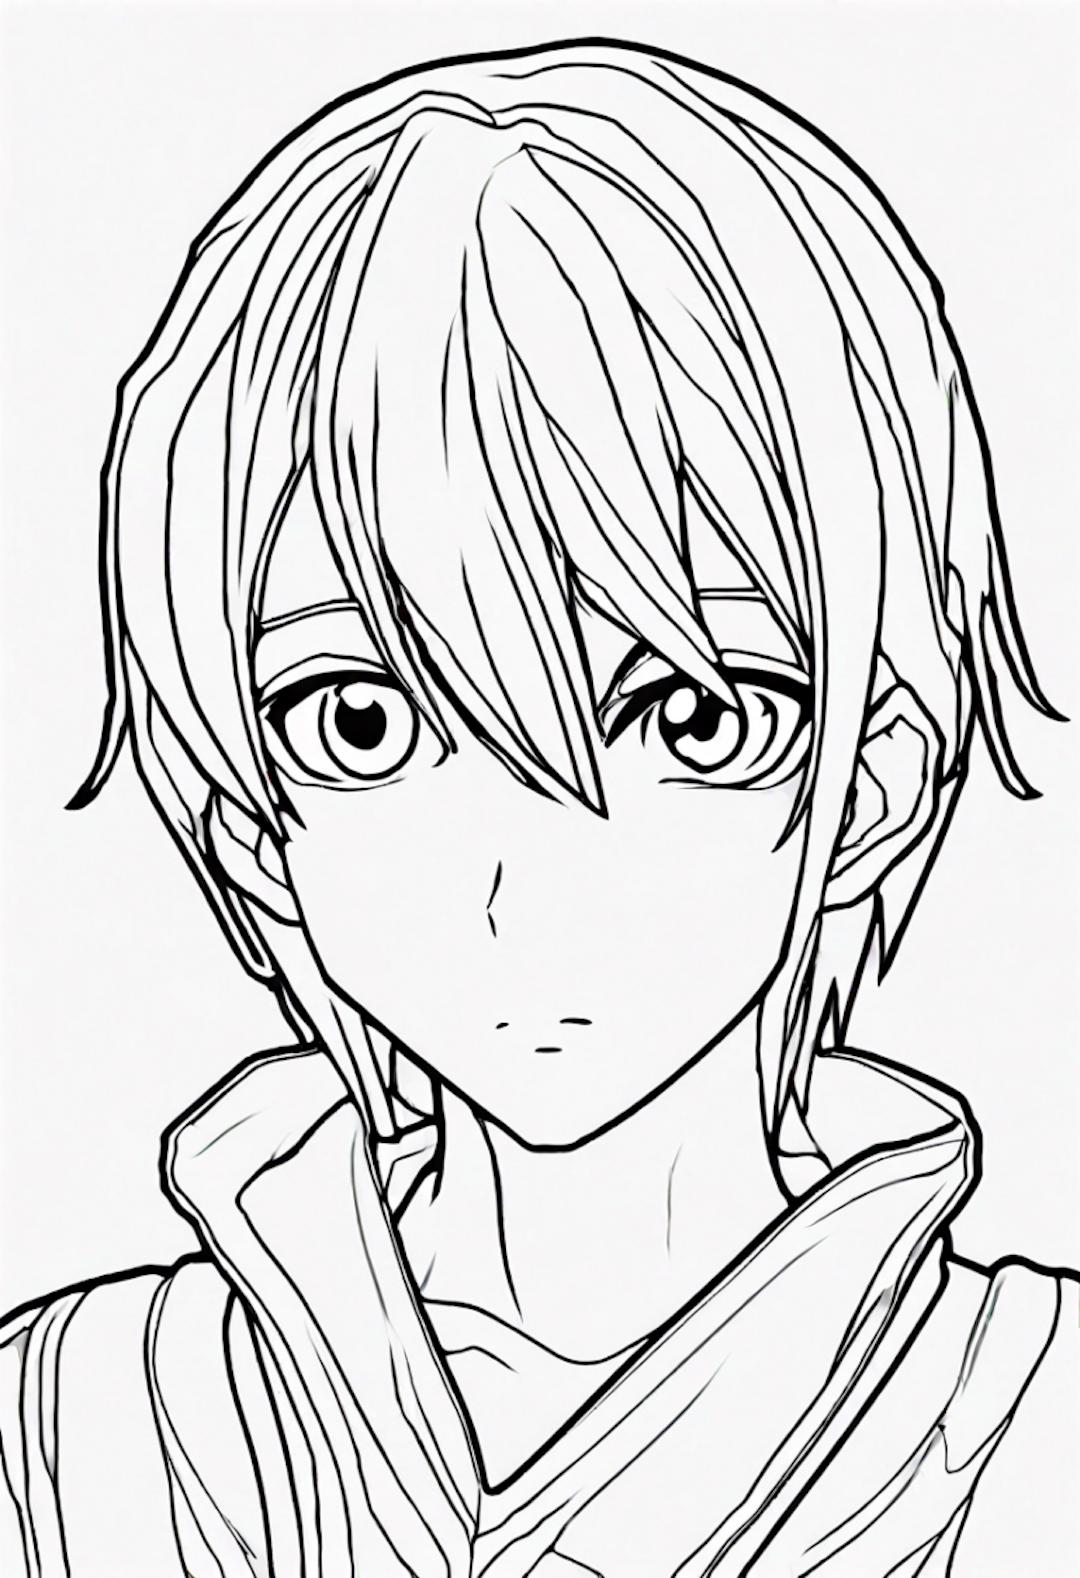 Young Anime Hero Portrait Coloring Page coloring pages